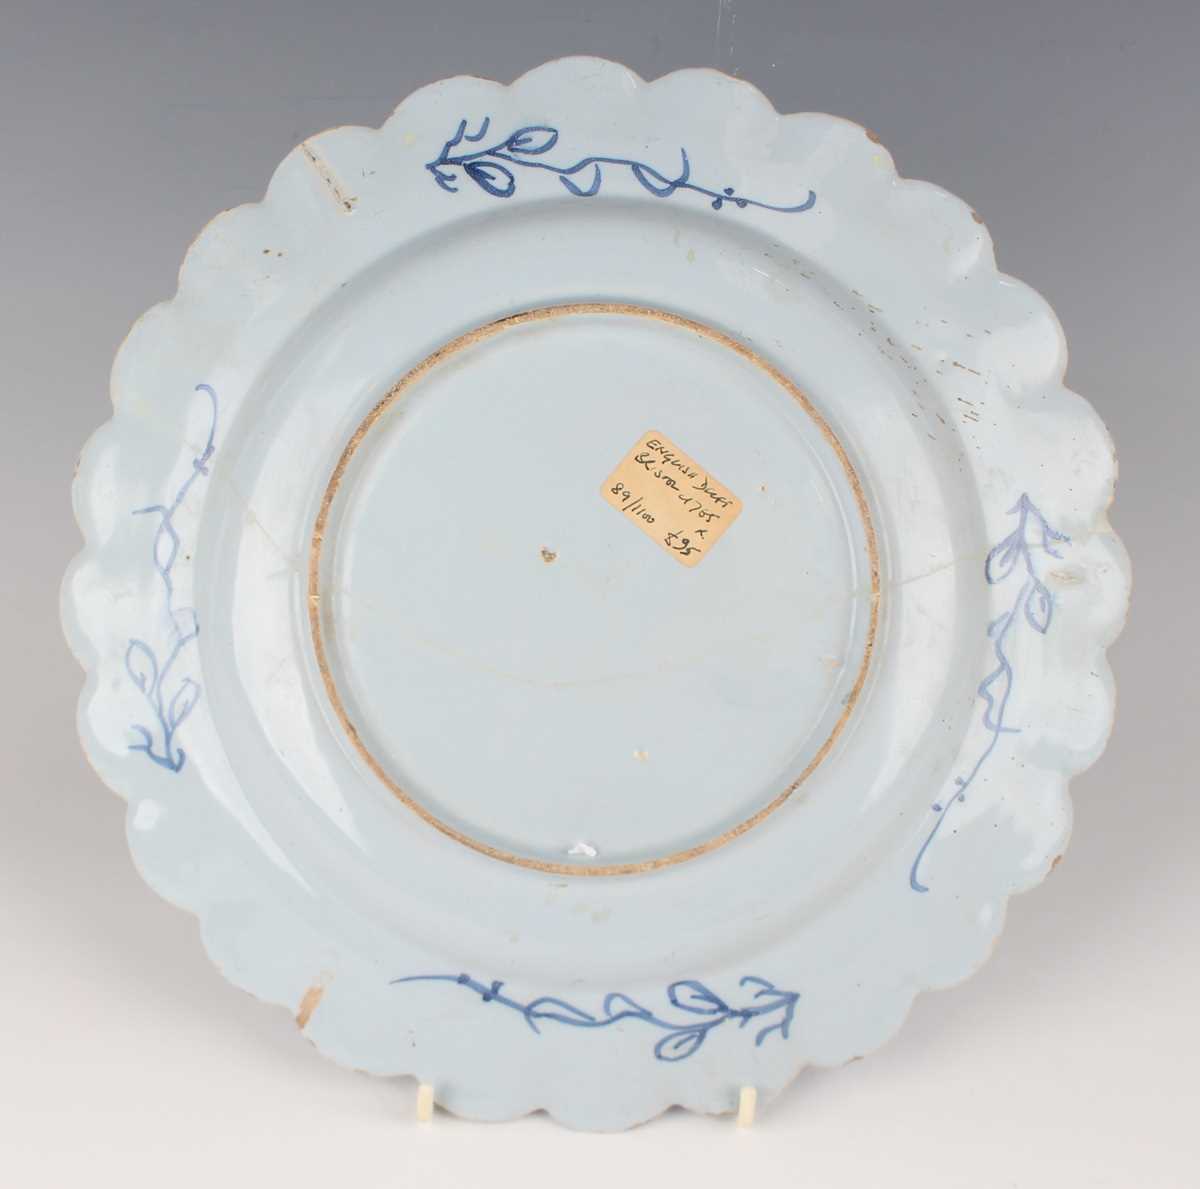 A manganese powdered ground delft dish, Bristol or Wincanton, circa 1740, painted in blue with a - Image 15 of 21